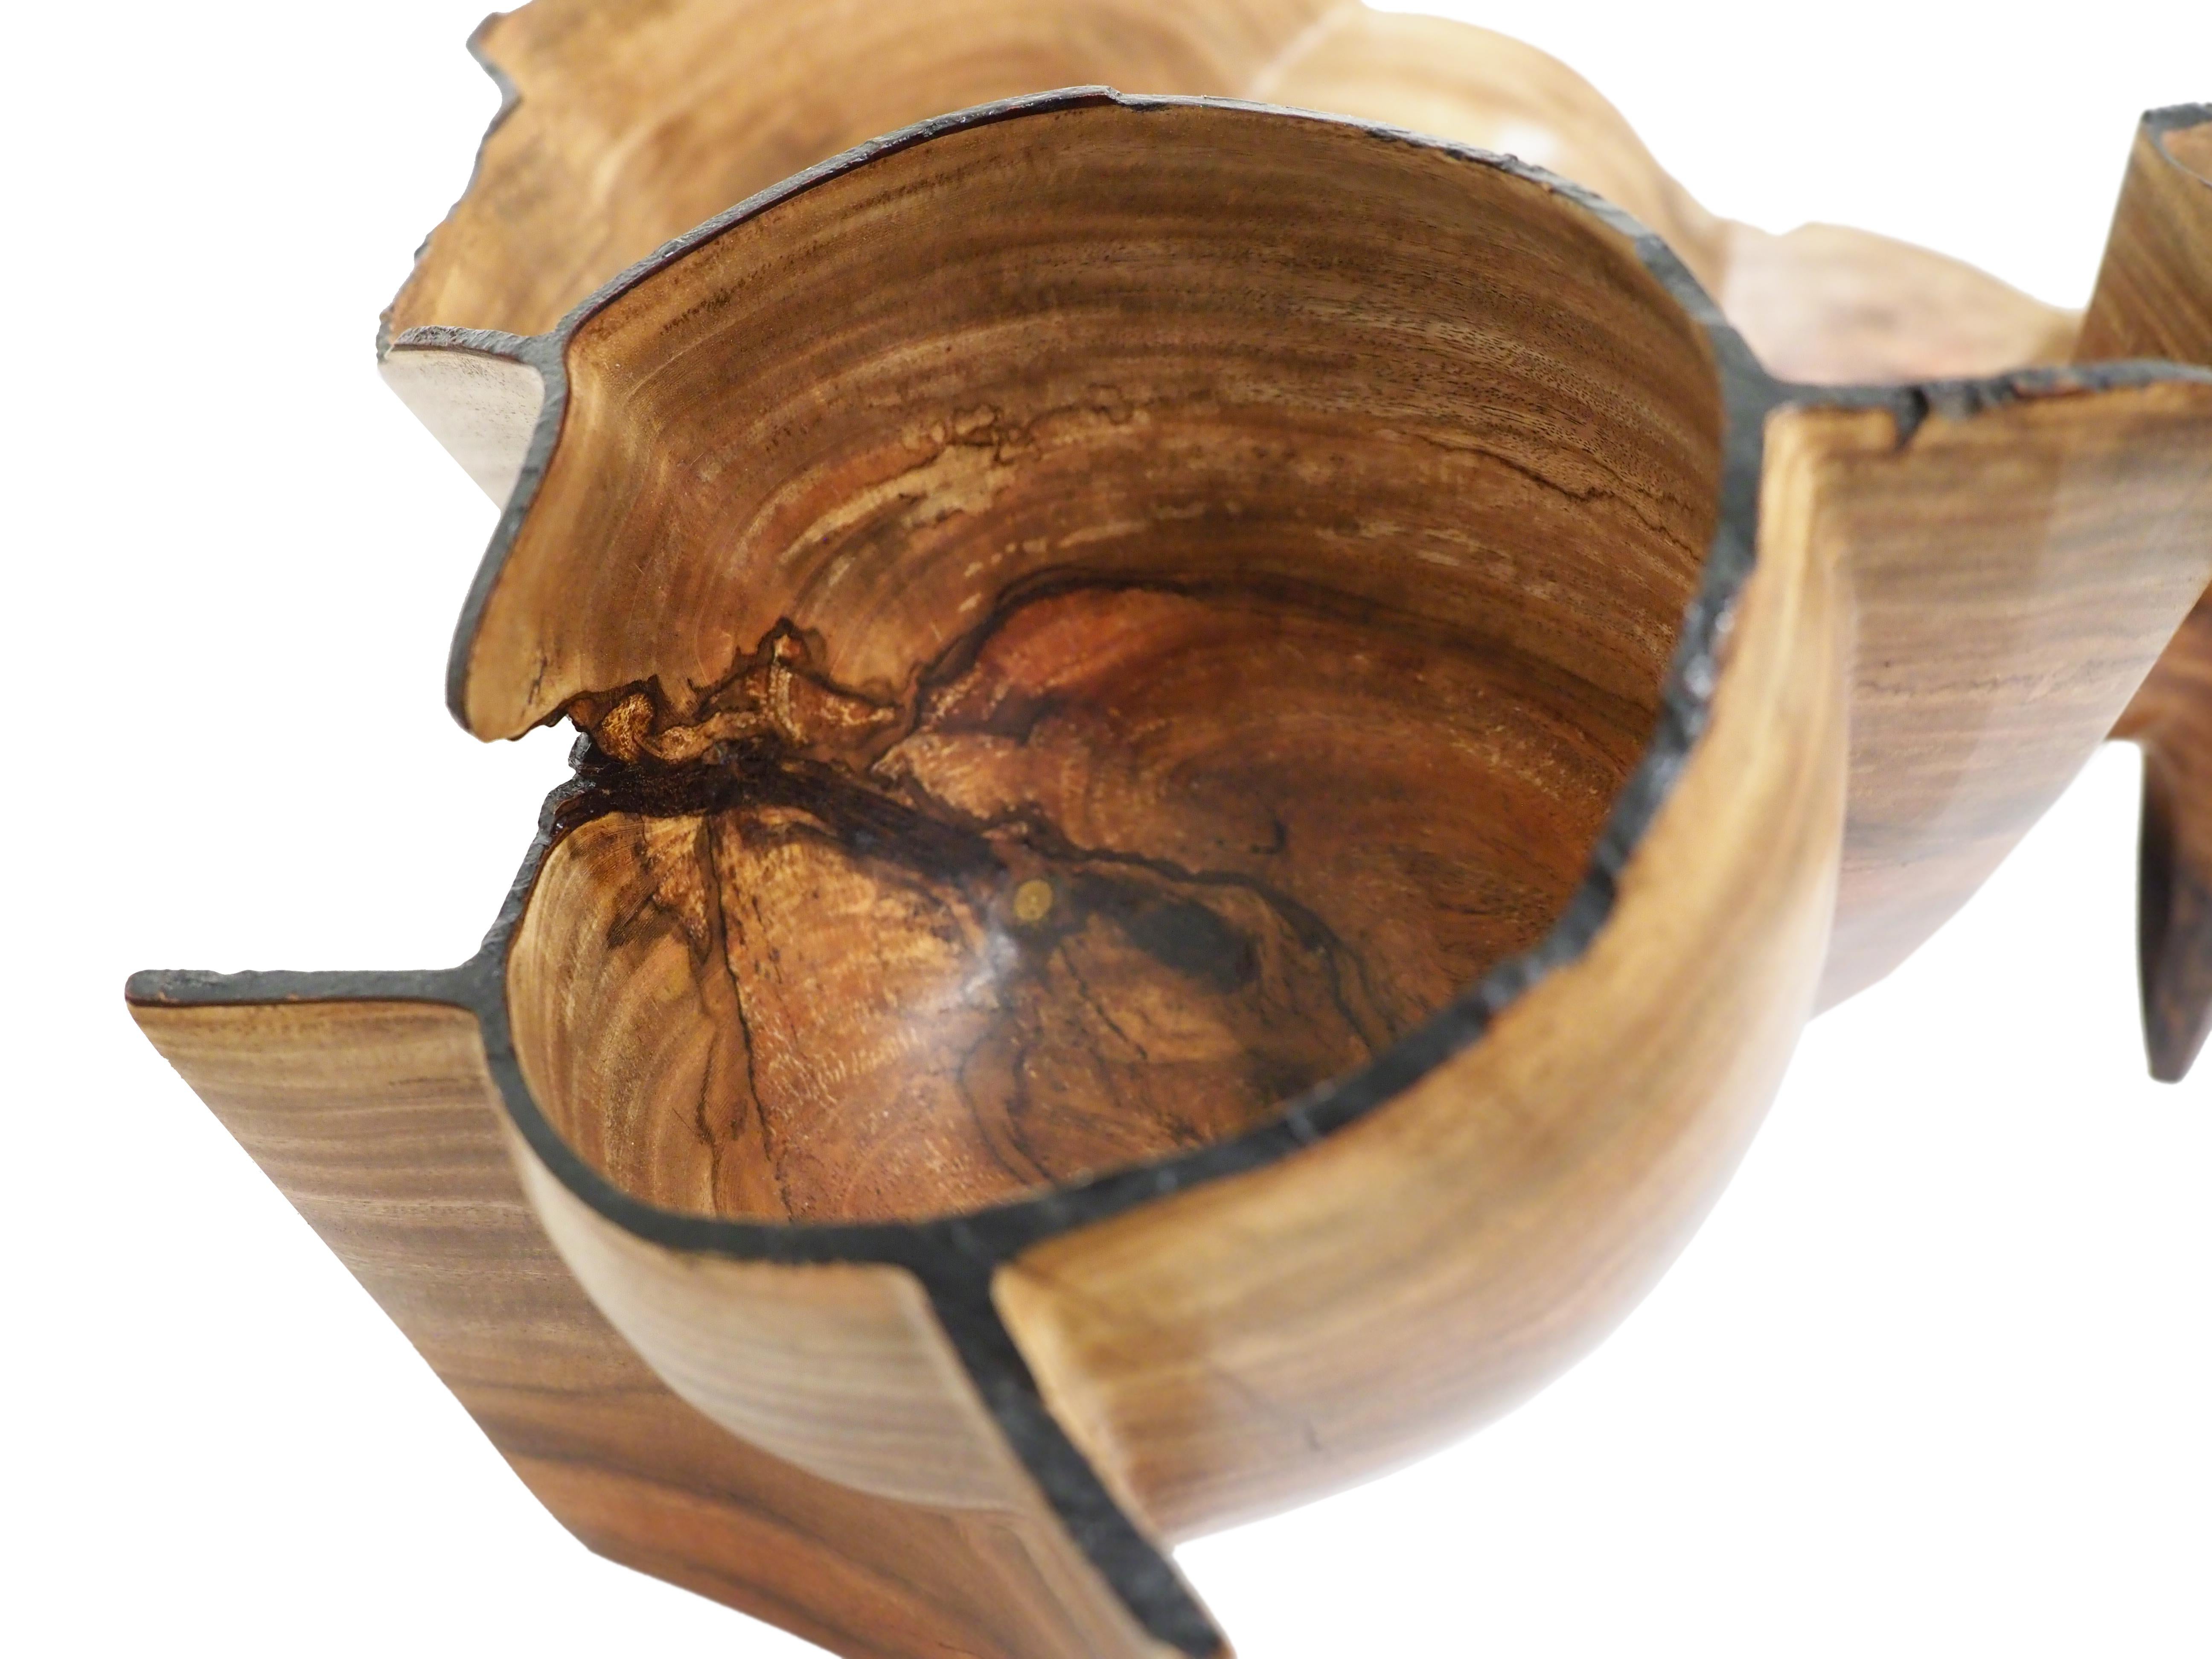 Saturn Moon by Nashville Artist, Brad Sells, is a beautiful sculpture made from tamarind wood with hand tint.